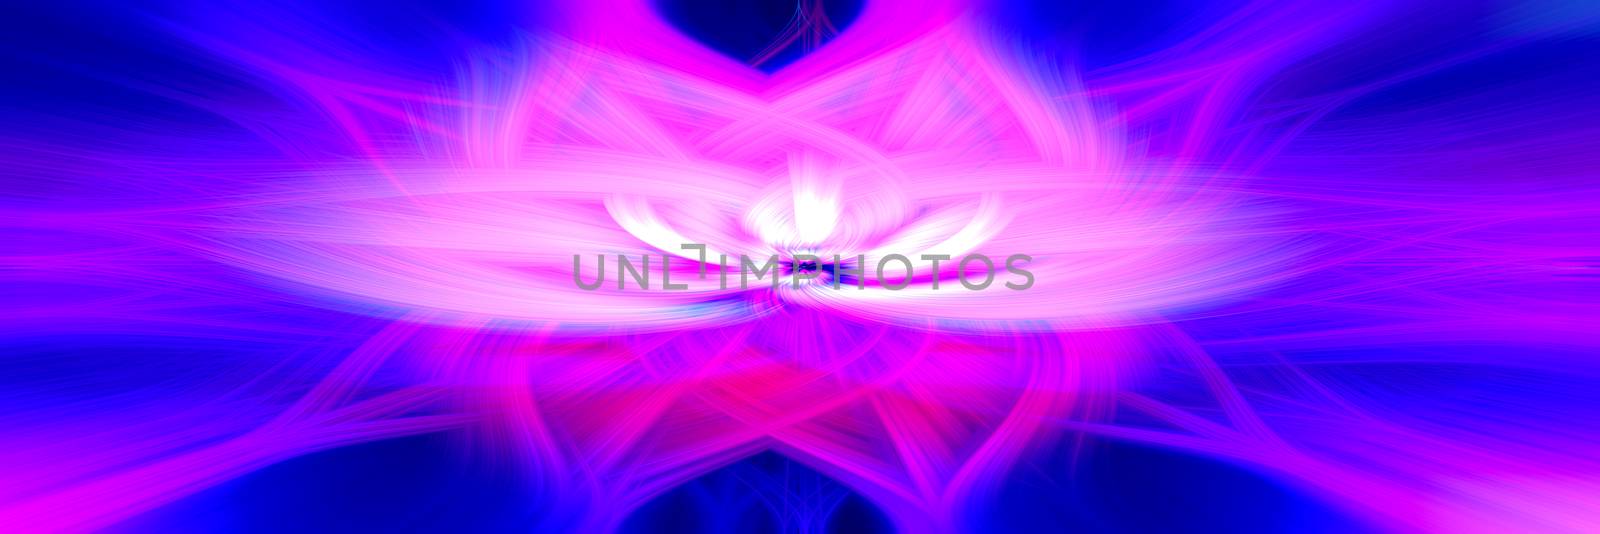 Beautiful abstract intertwined 3d fibers forming a shape of sparkle, flame, flower, interlinked hearts. Pink, purple, and blue colors. Illustration. Banner and panorama size. by DamantisZ